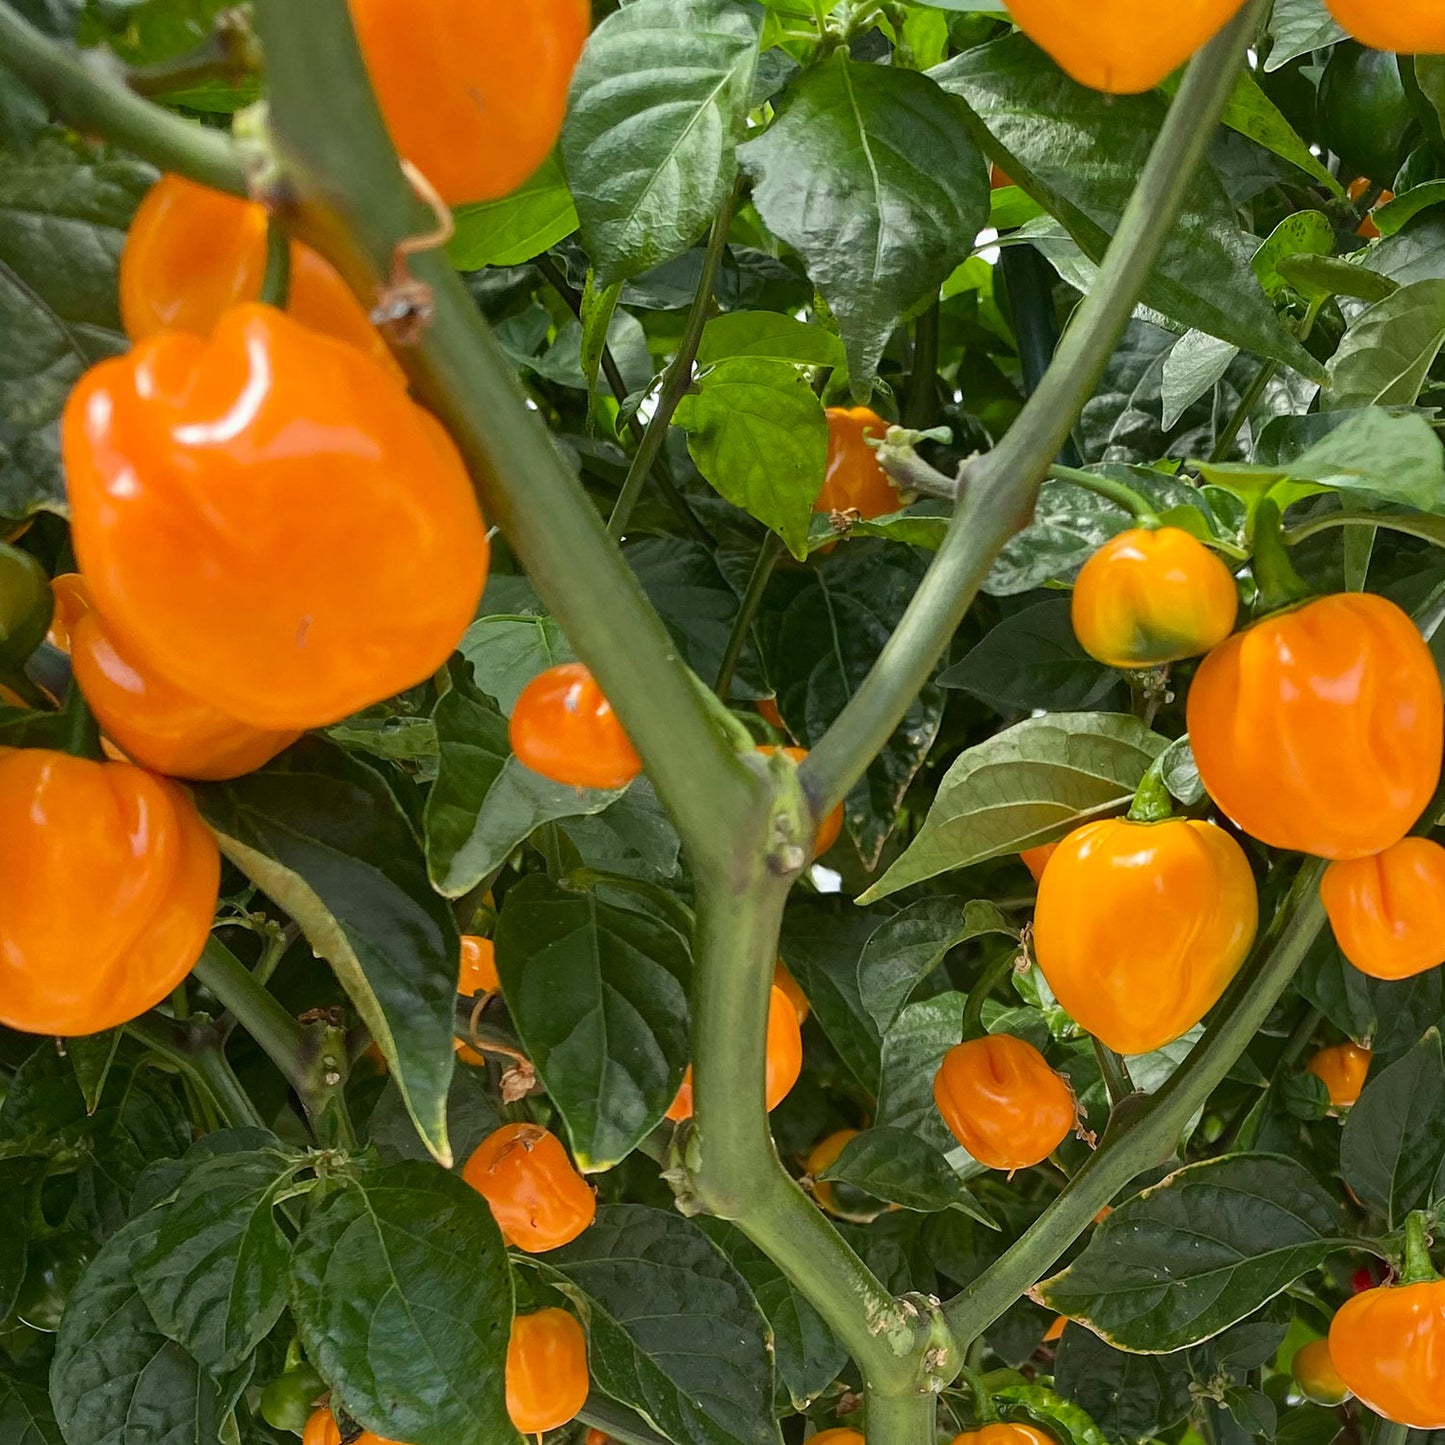 Pepper Joe's Fresh Hot Peppers - Variety mix - orange hot peppers on plant